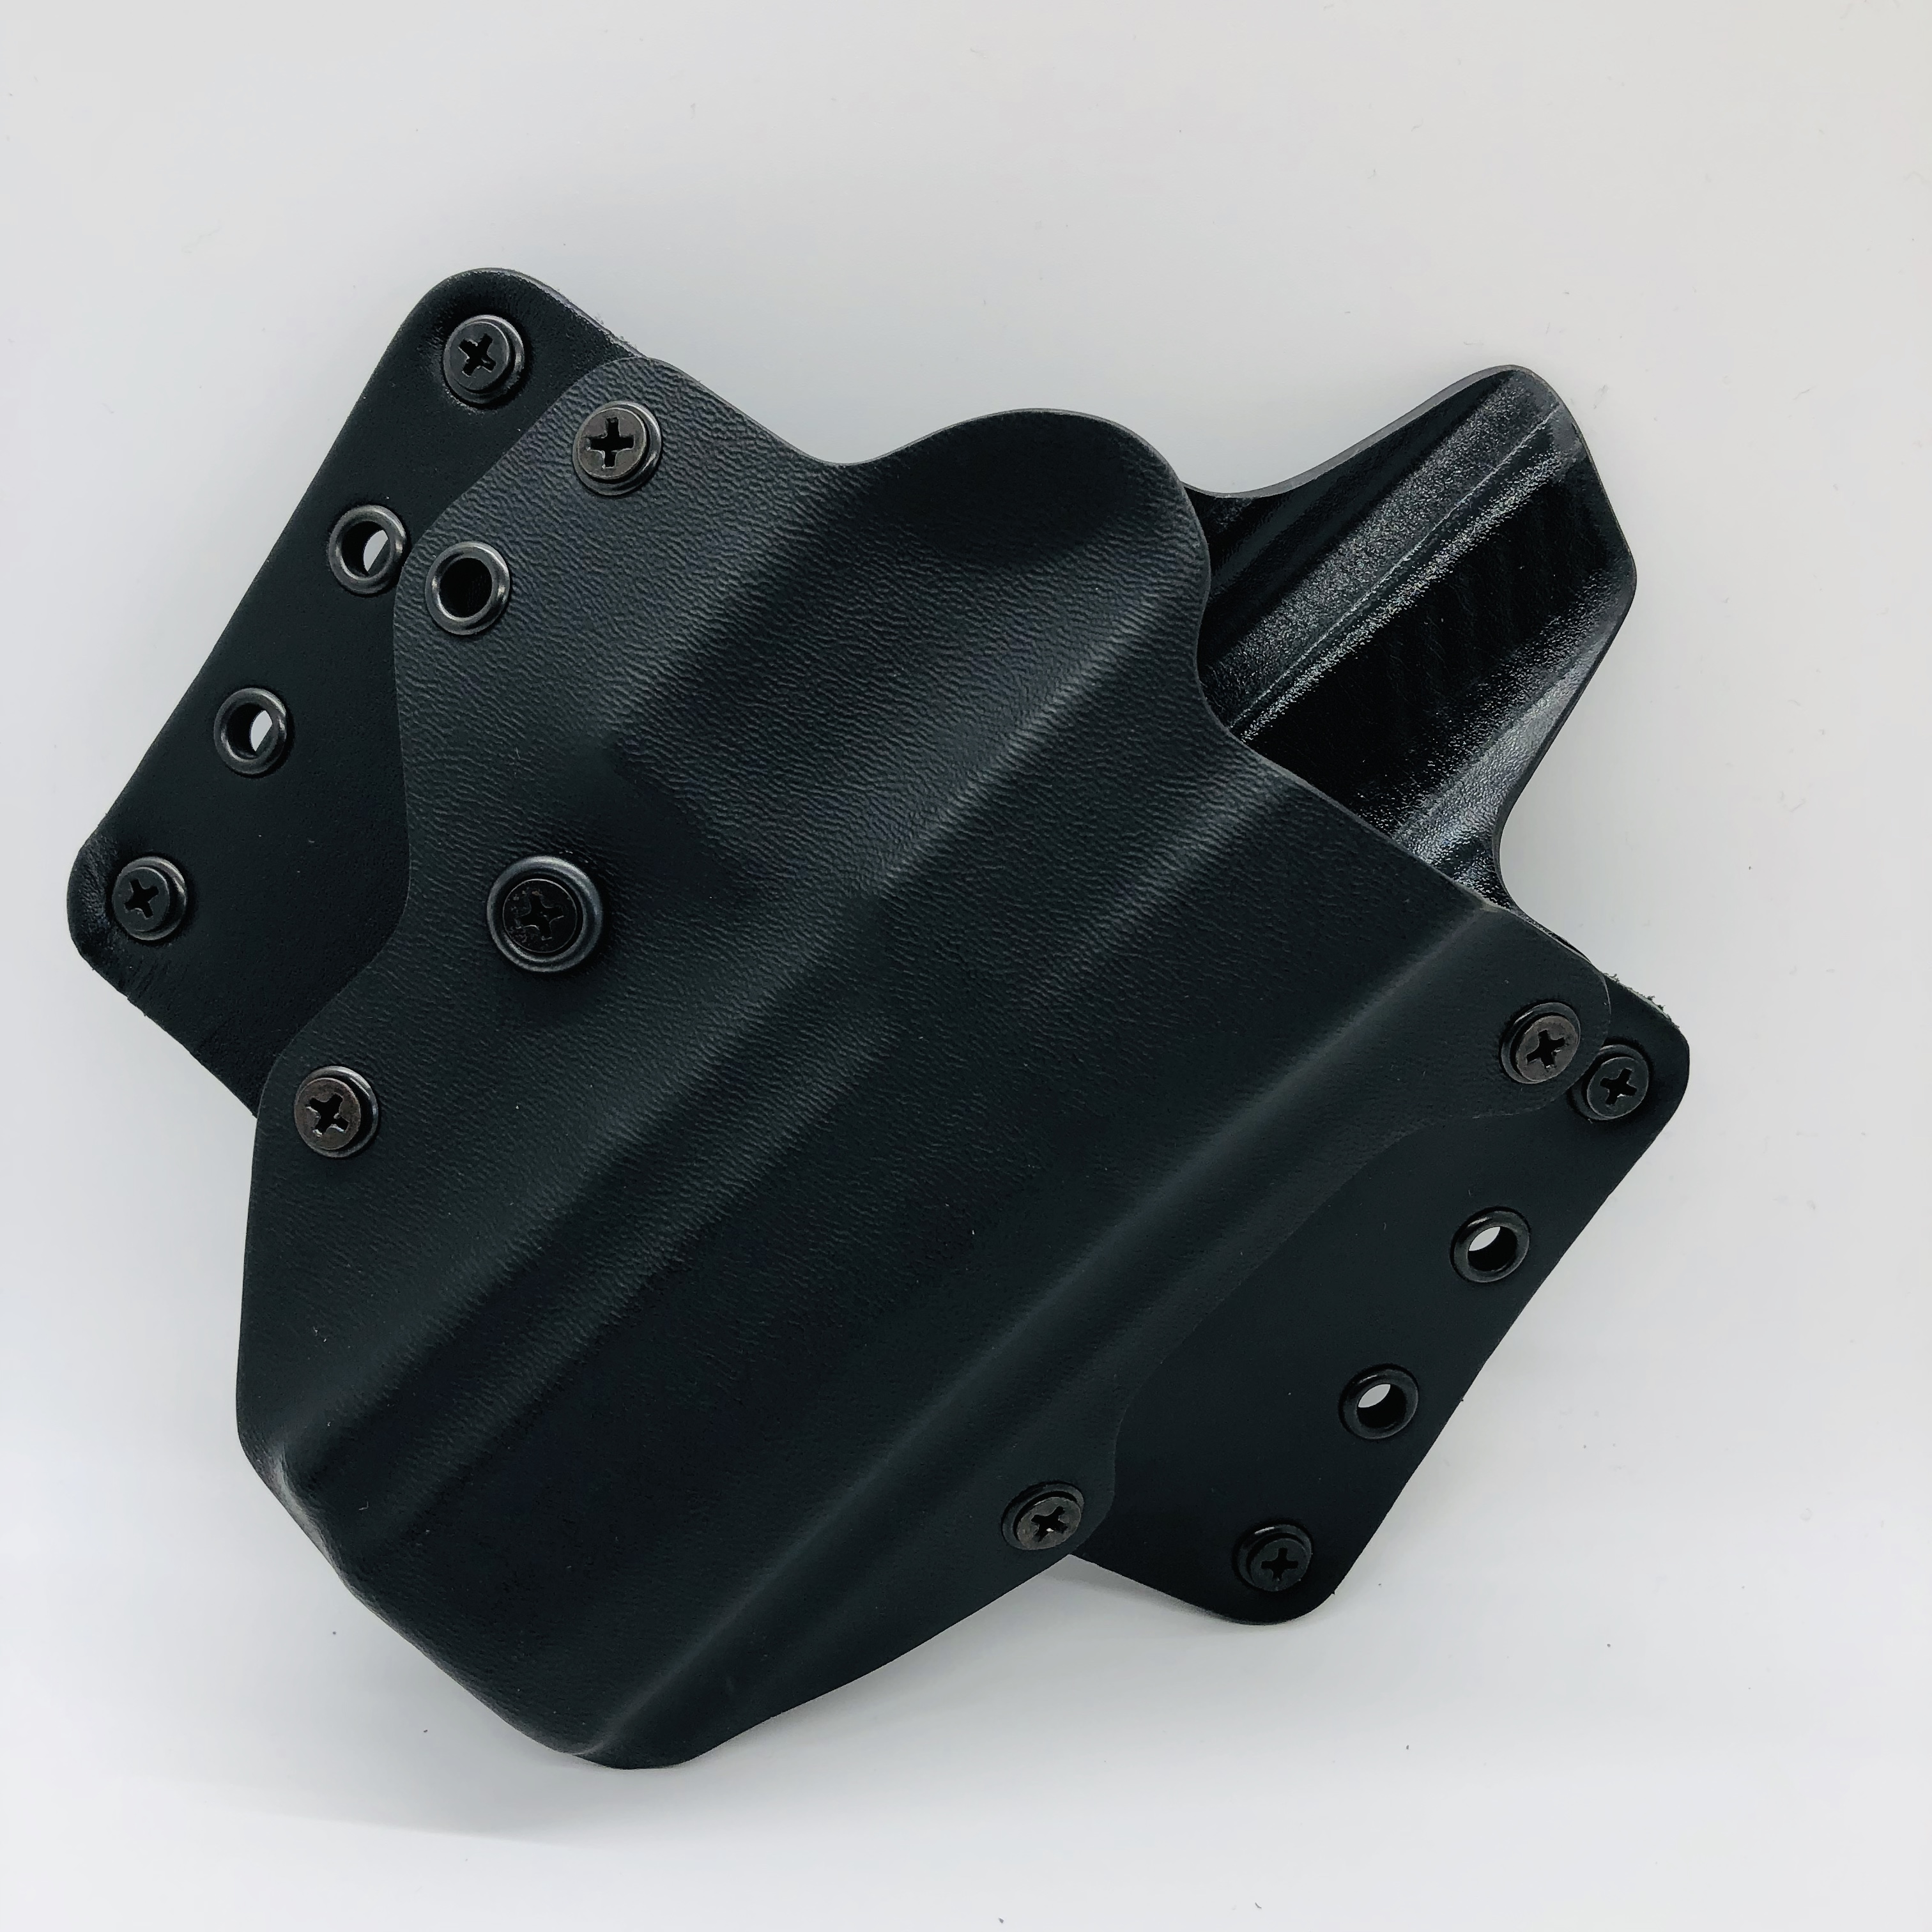 Blackpoint Tactical RH Leather Wing Holster for GLOCK 17/22 Black 100080 for sale online 